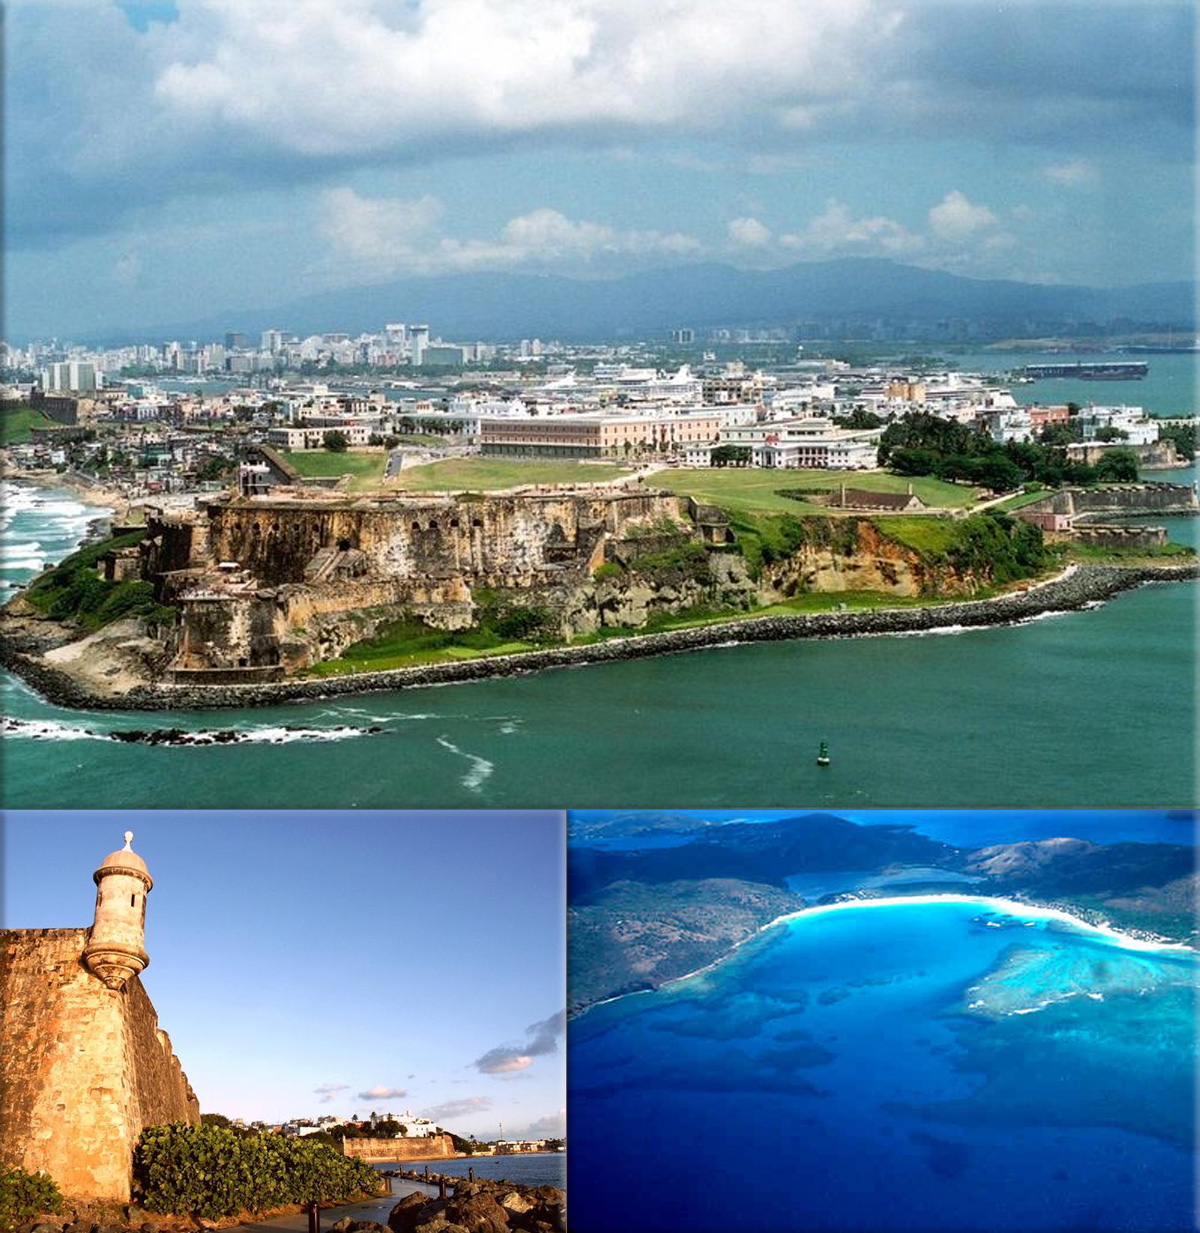 Puerto Rico officially the Commonwealth of Puerto Rico: is an unincorporated territory of the United States, located in the northeastern Caribbean, east of the Dominican Republic and west of both the United States Virgin Islands and the British Virgin Islands